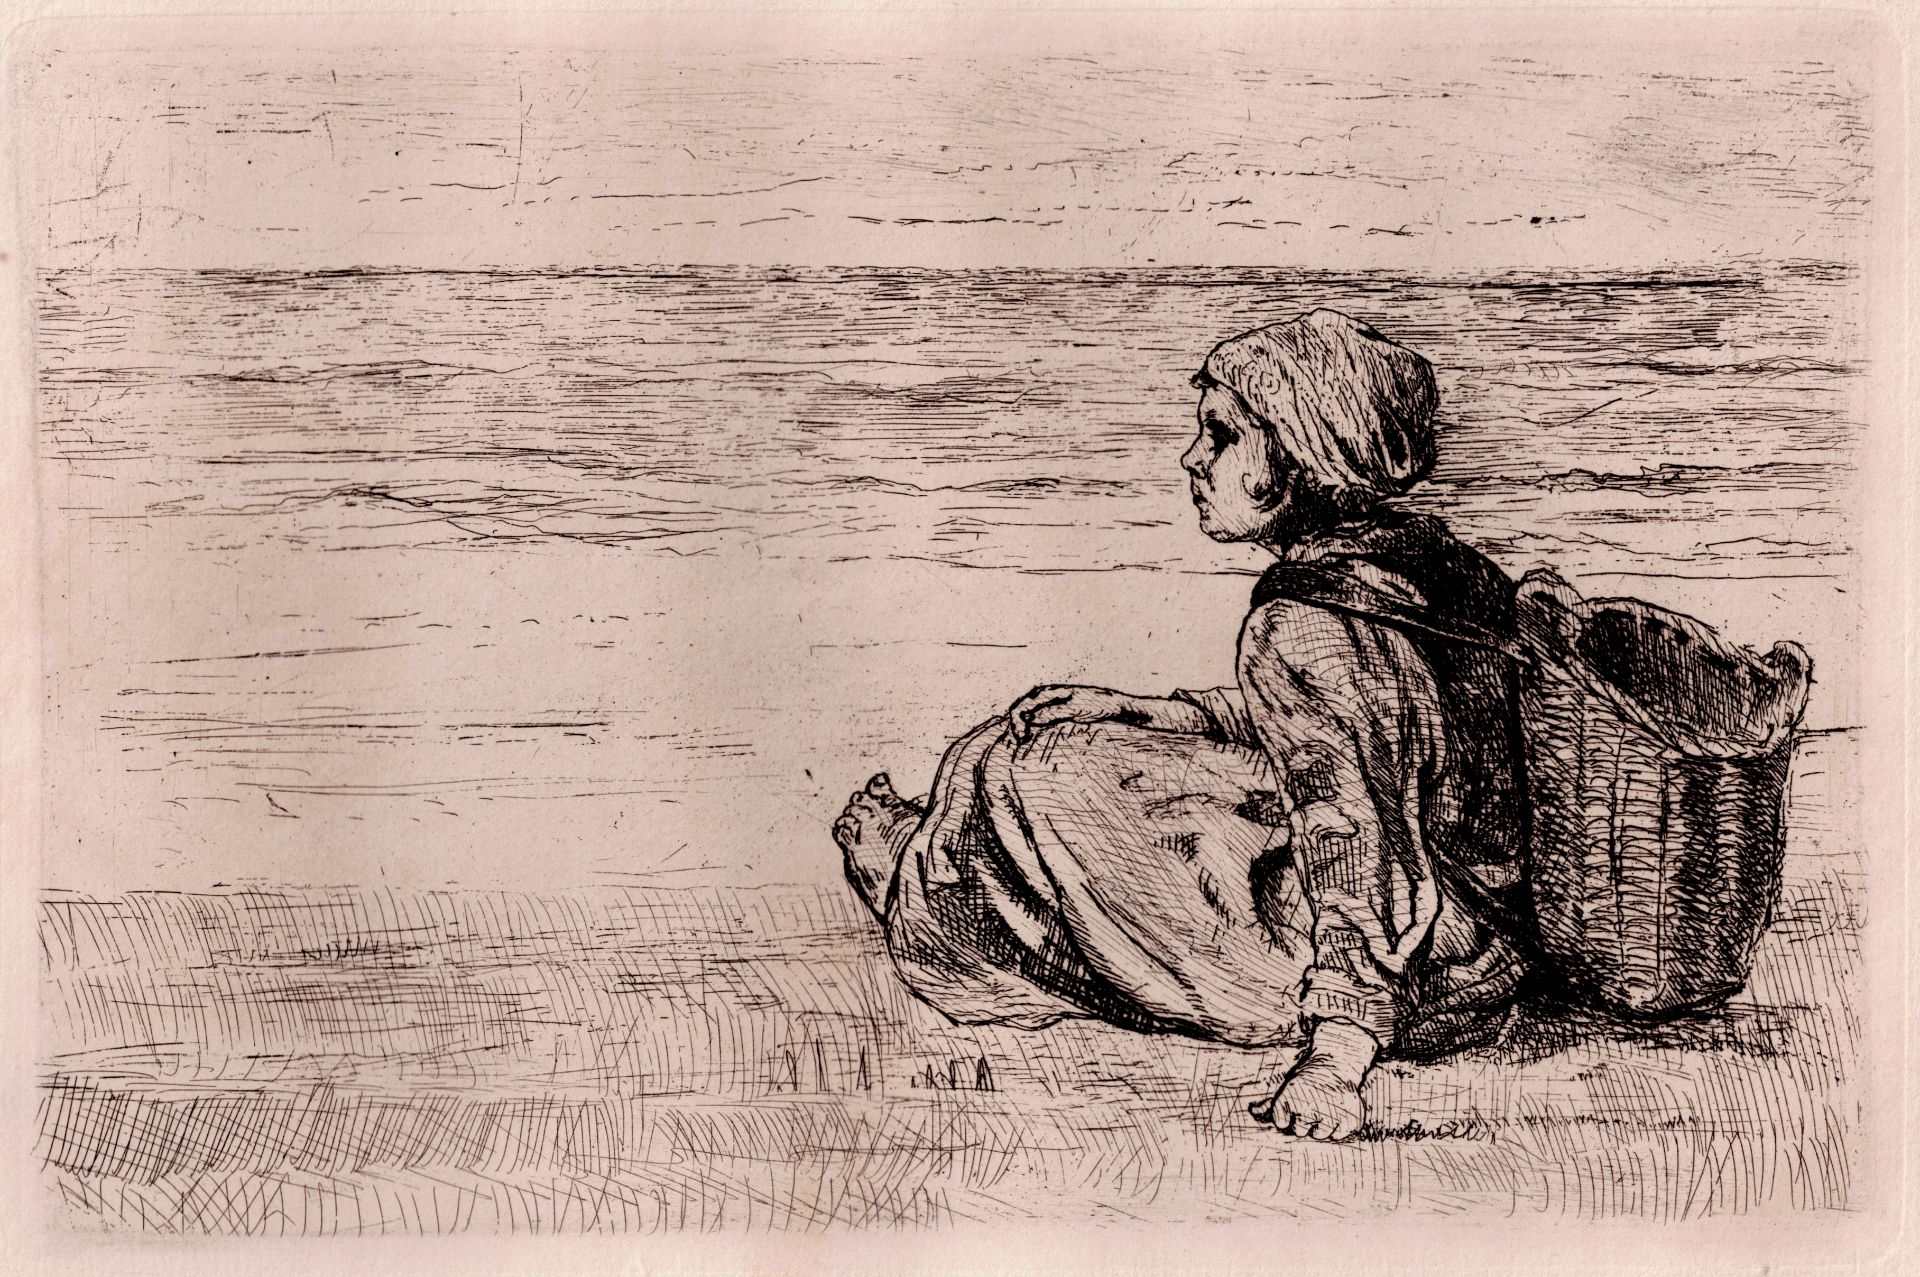 Jozef Israëls -  Girl with basket seated on the shore - 1879